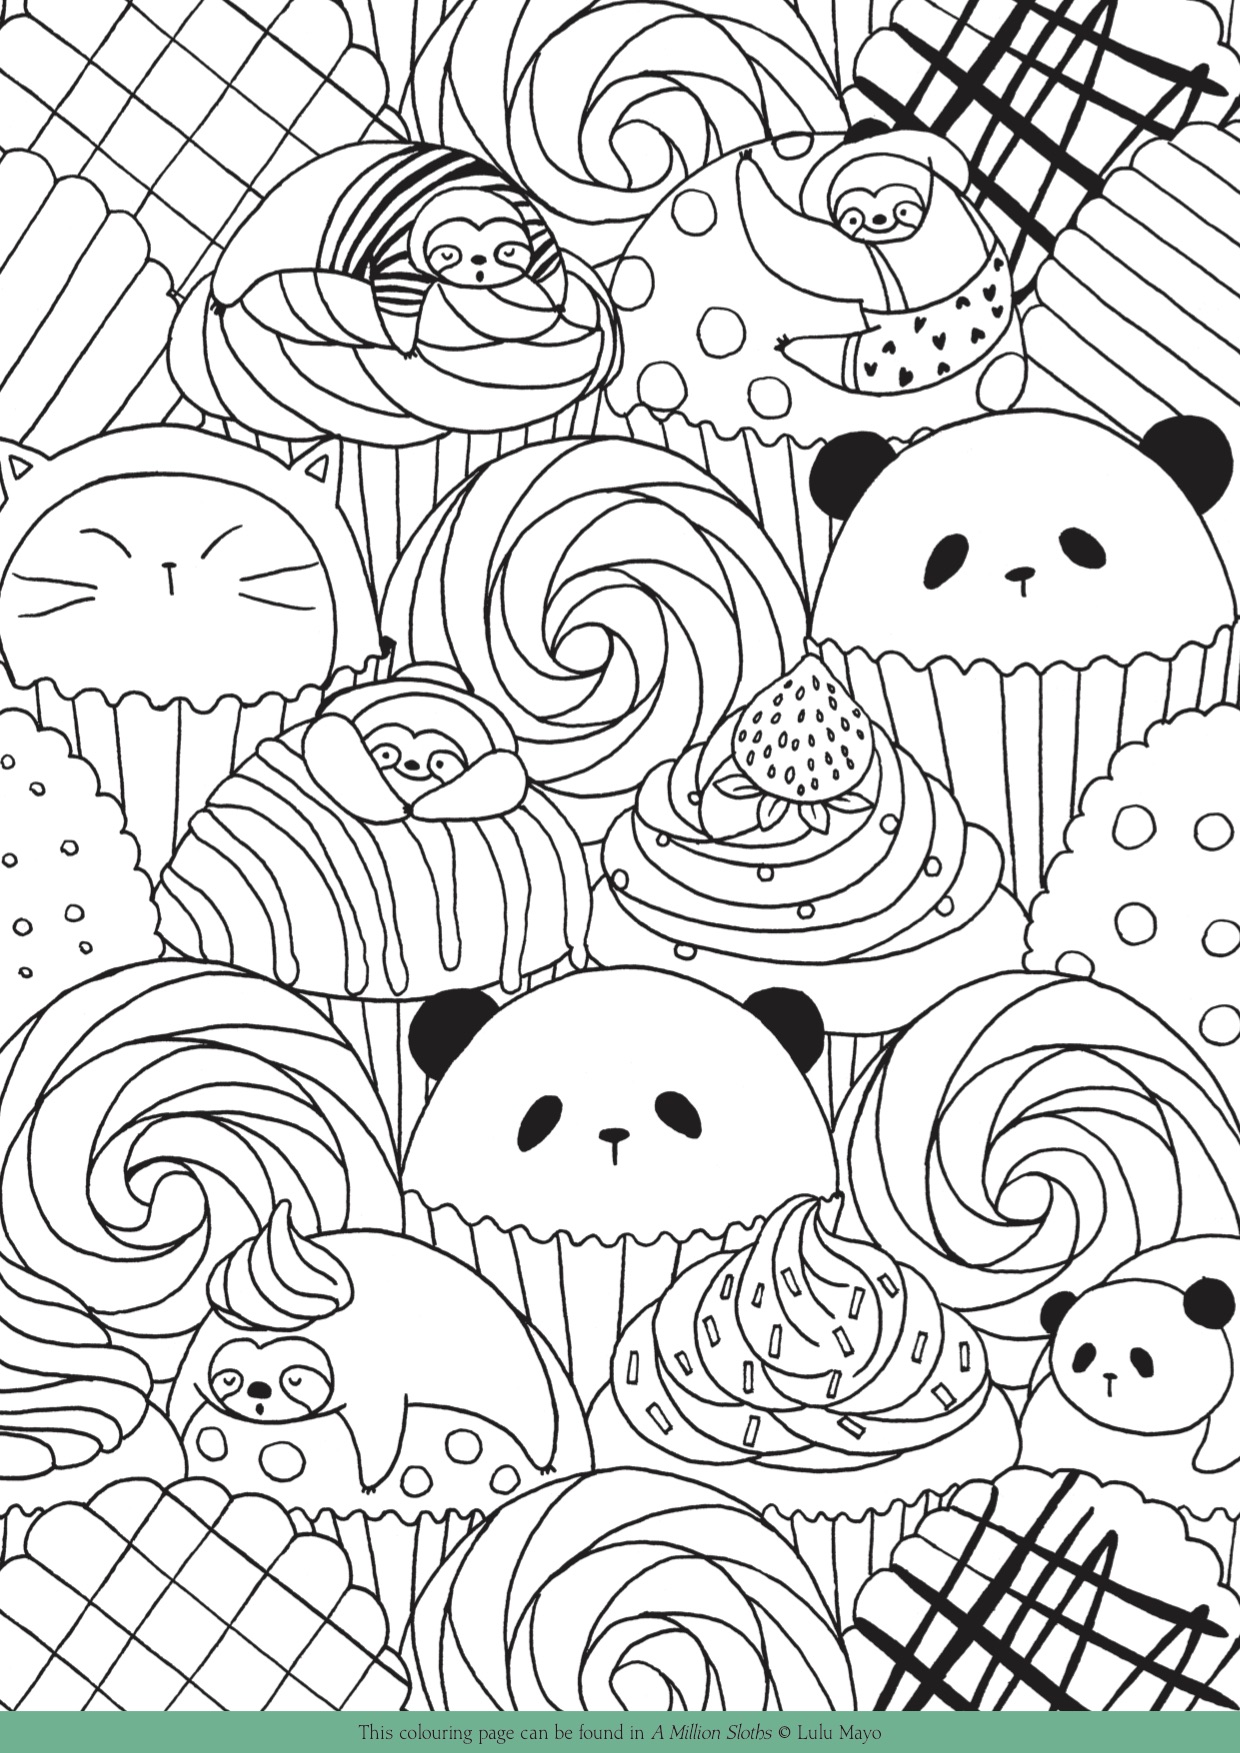 coloring-books-for-adults-coloring-operaou